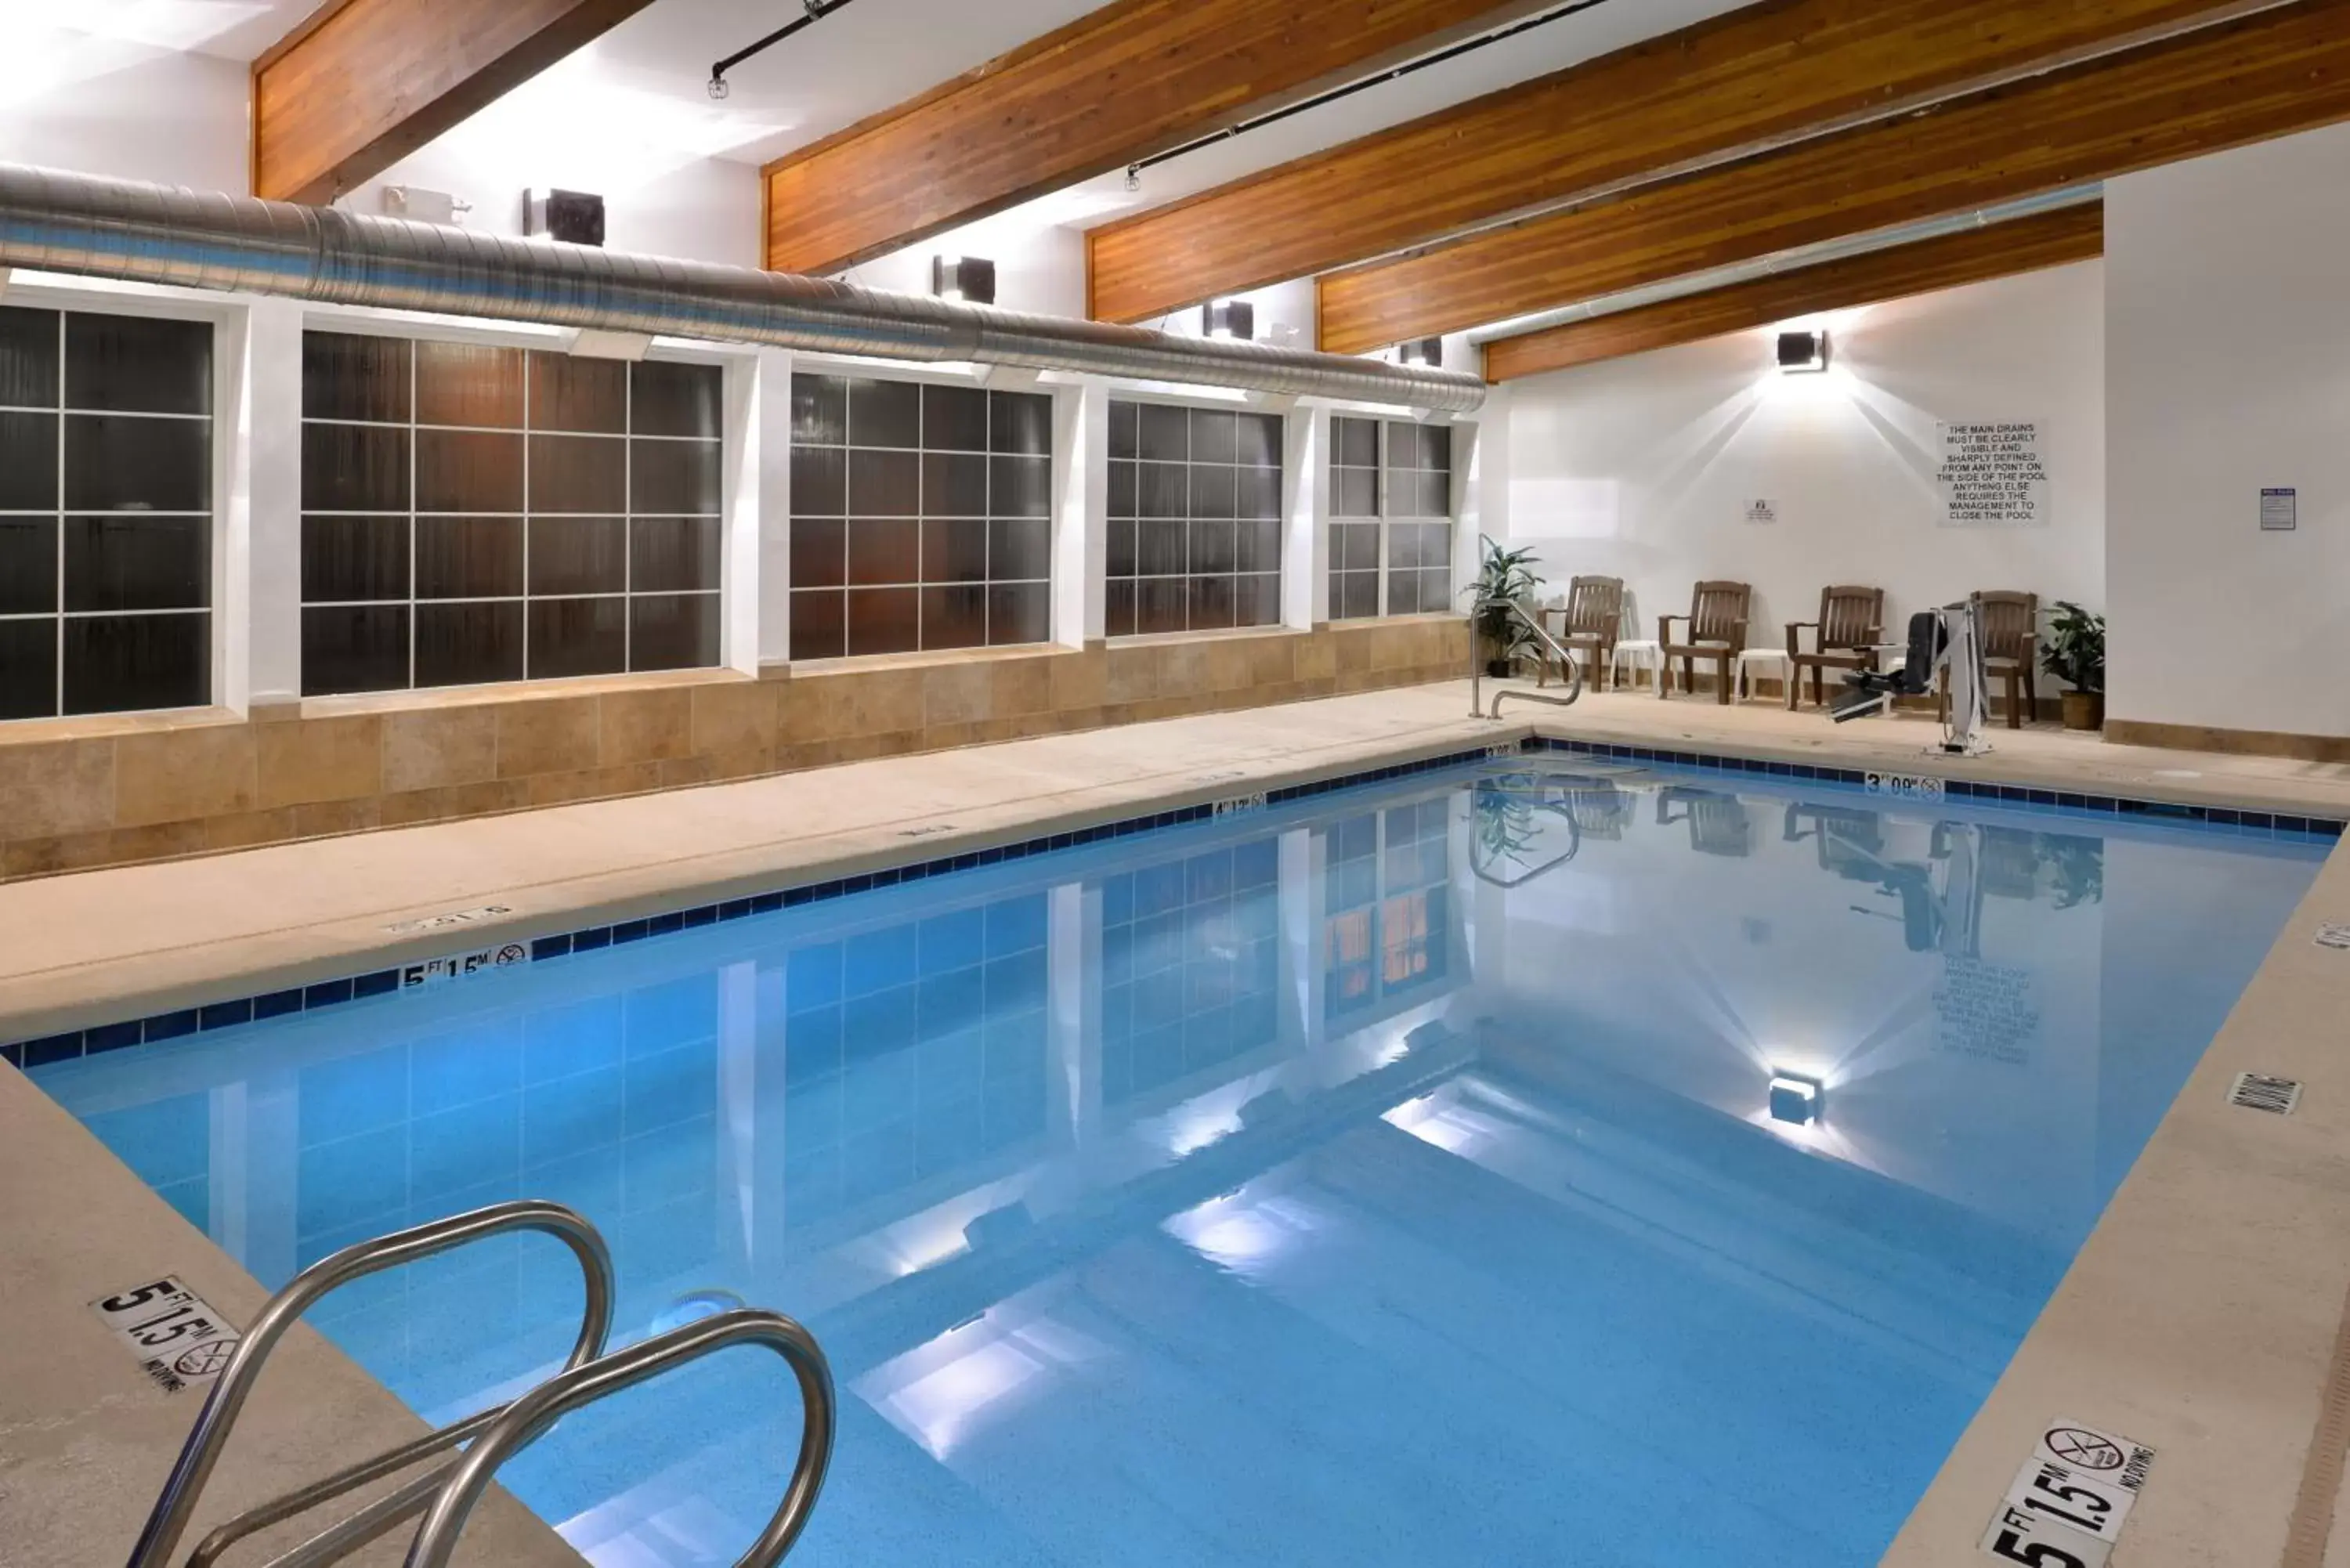 Swimming Pool in Stage Coach Inn